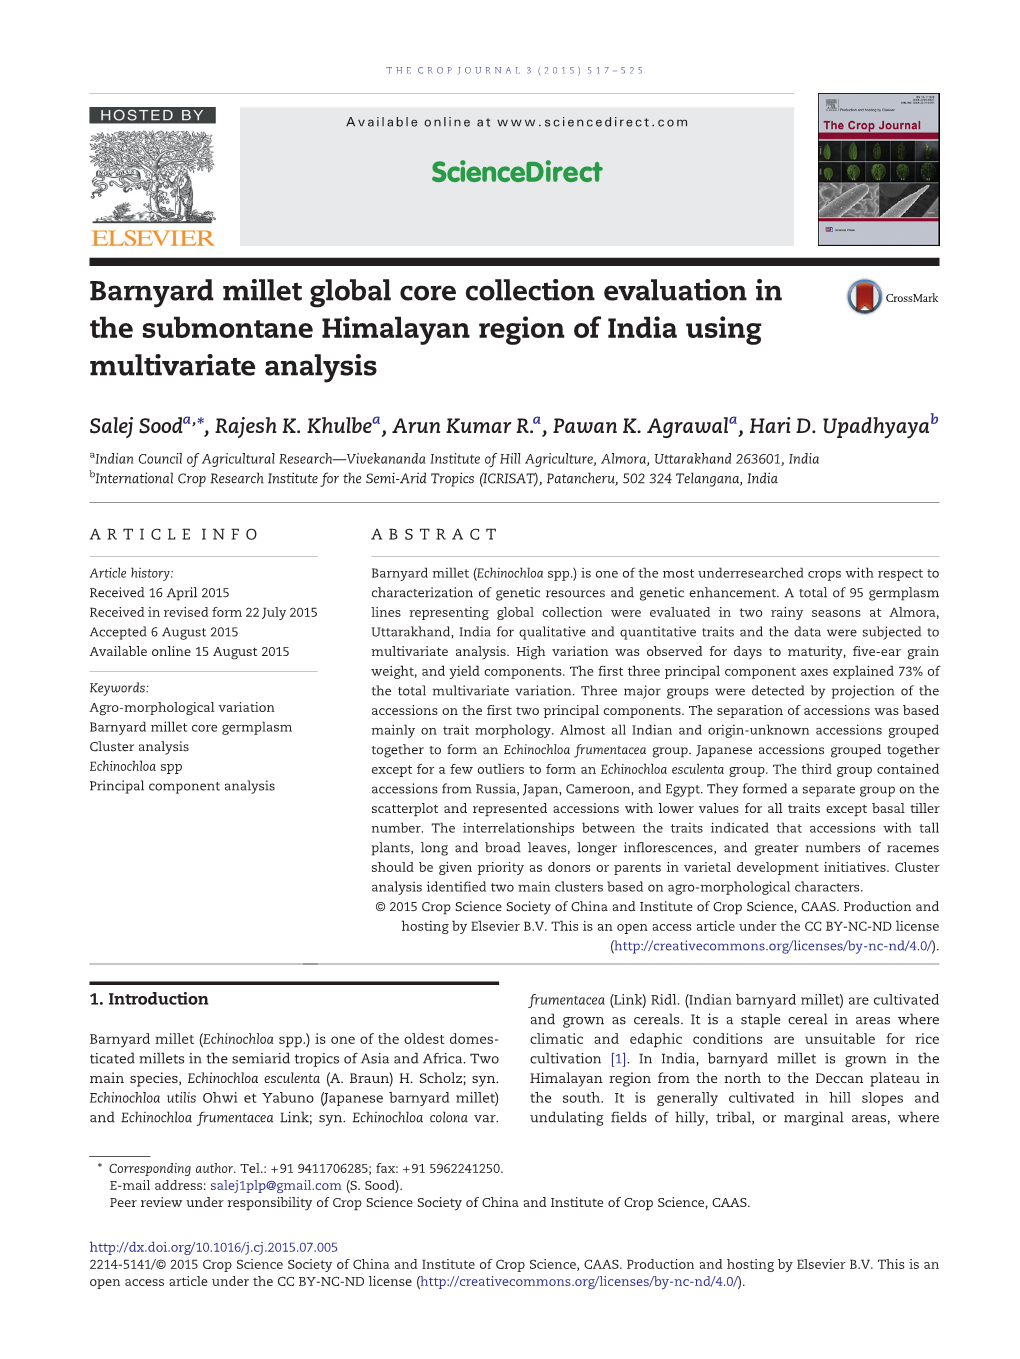 Barnyard Millet Global Core Collection Evaluation in the Submontane Himalayan Region of India Using Multivariate Analysis